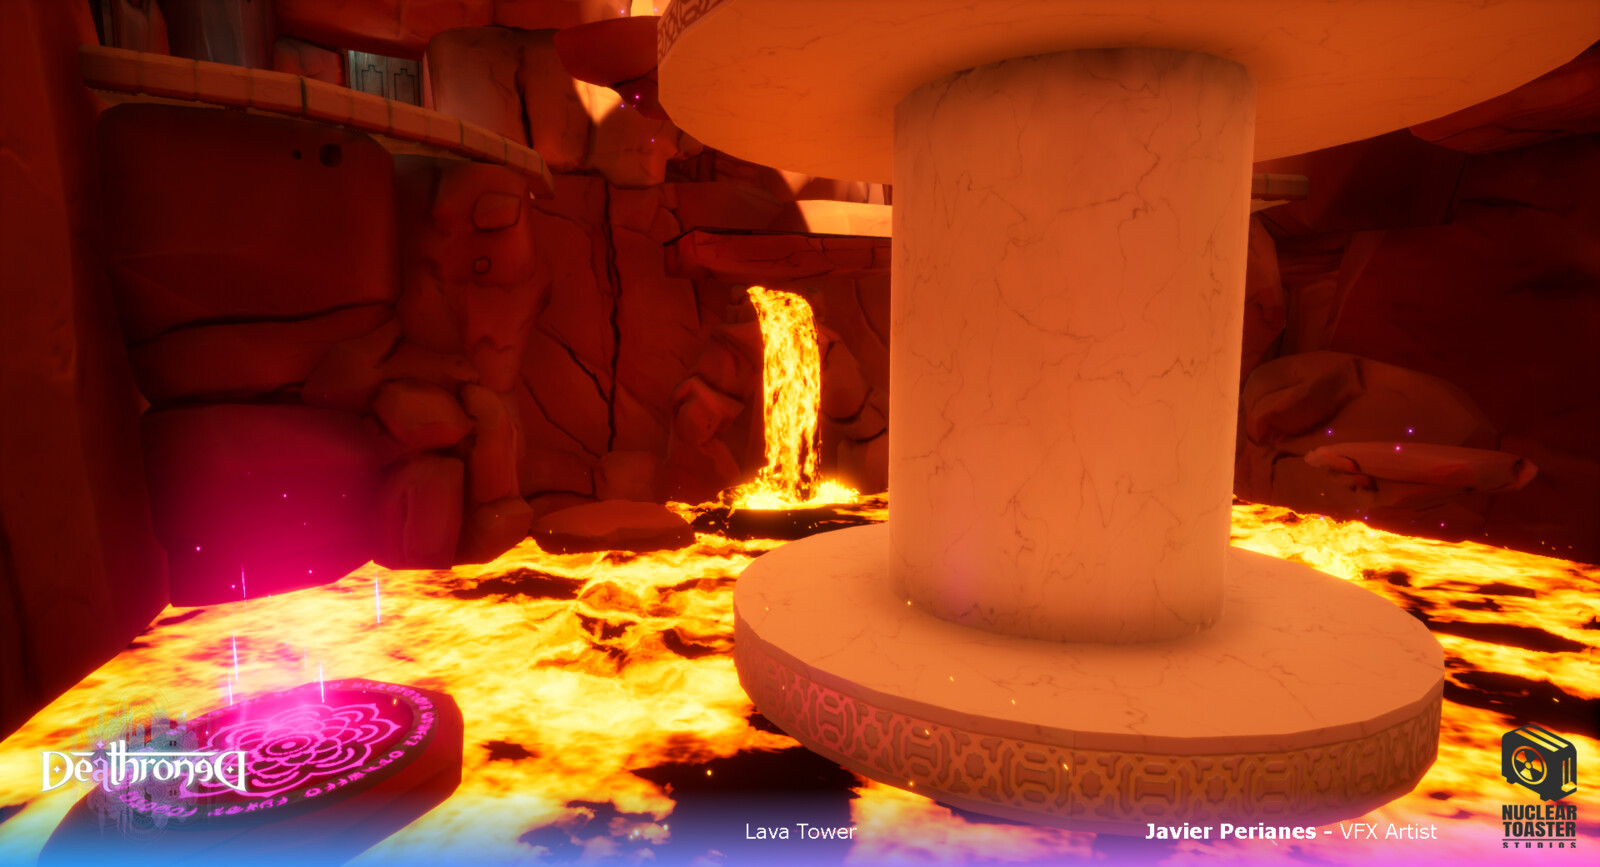 The lava shader in an environment